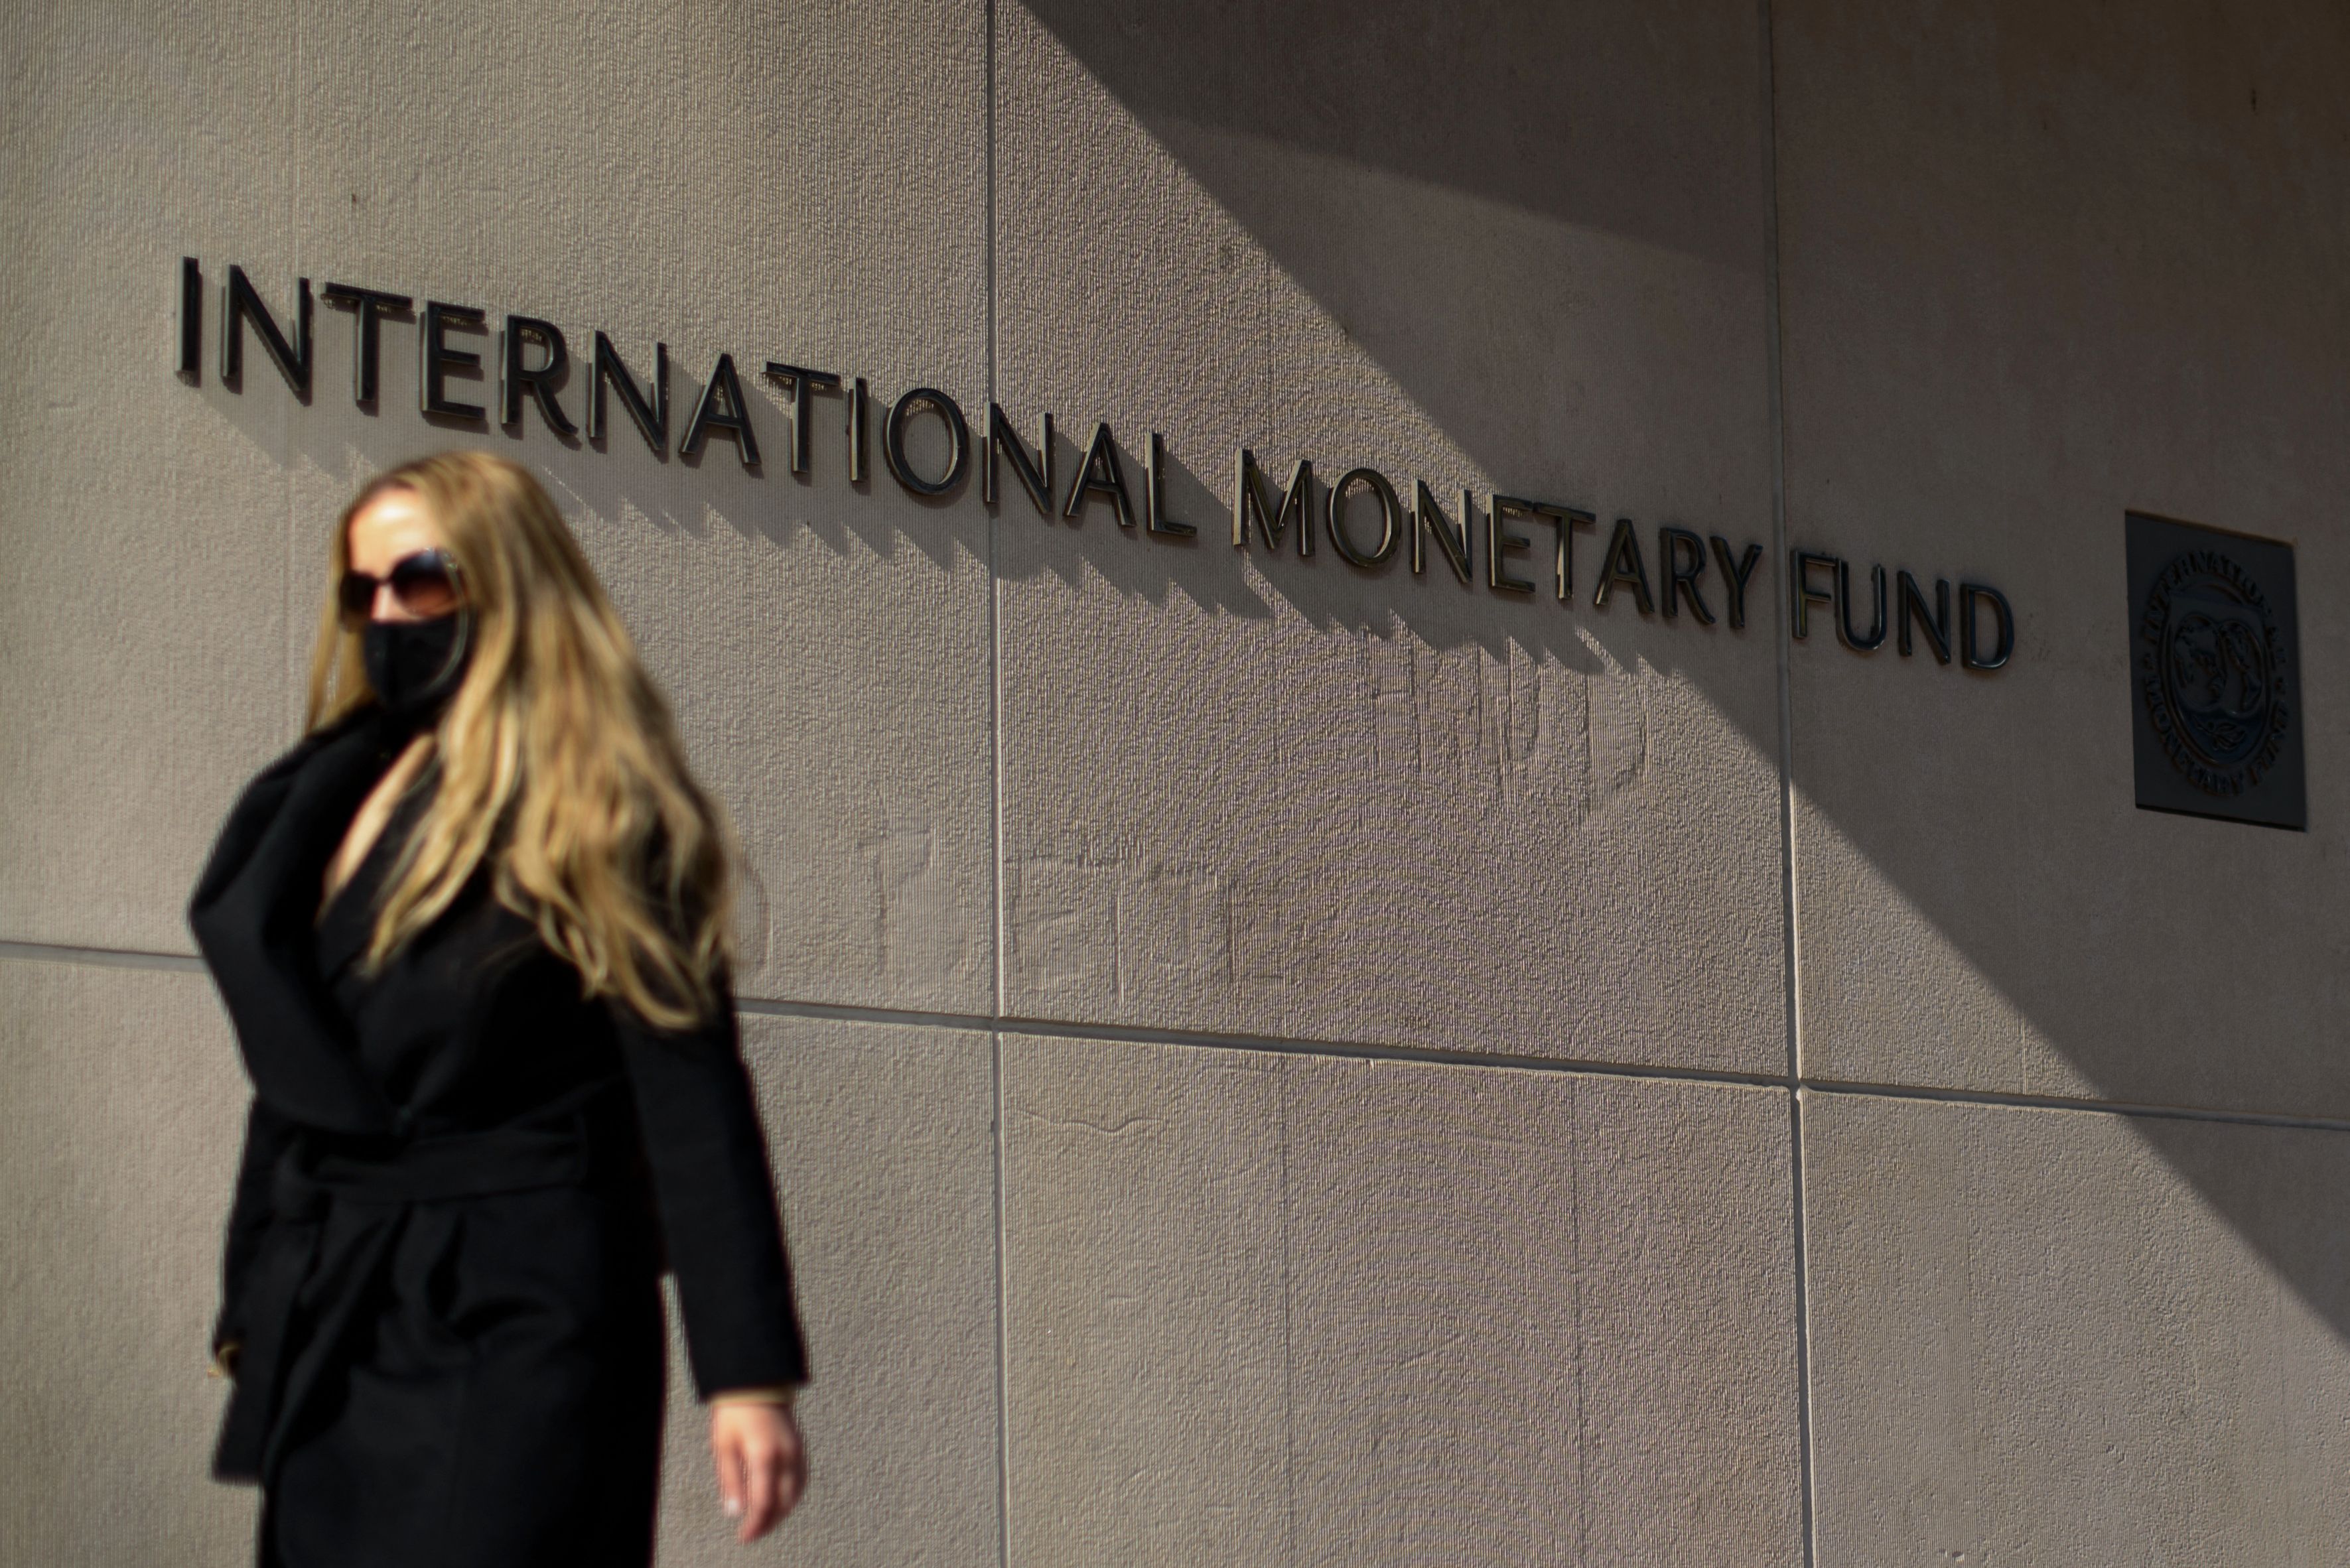 WASHINGTON: File photo shows, a woman walks past an International Monetary Fund headquarters (IMF) building in Washington, DC. The IMF will withhold funds to Afghanistan amid the uncertainty over the status of the leadership in Kabul. - AFPn